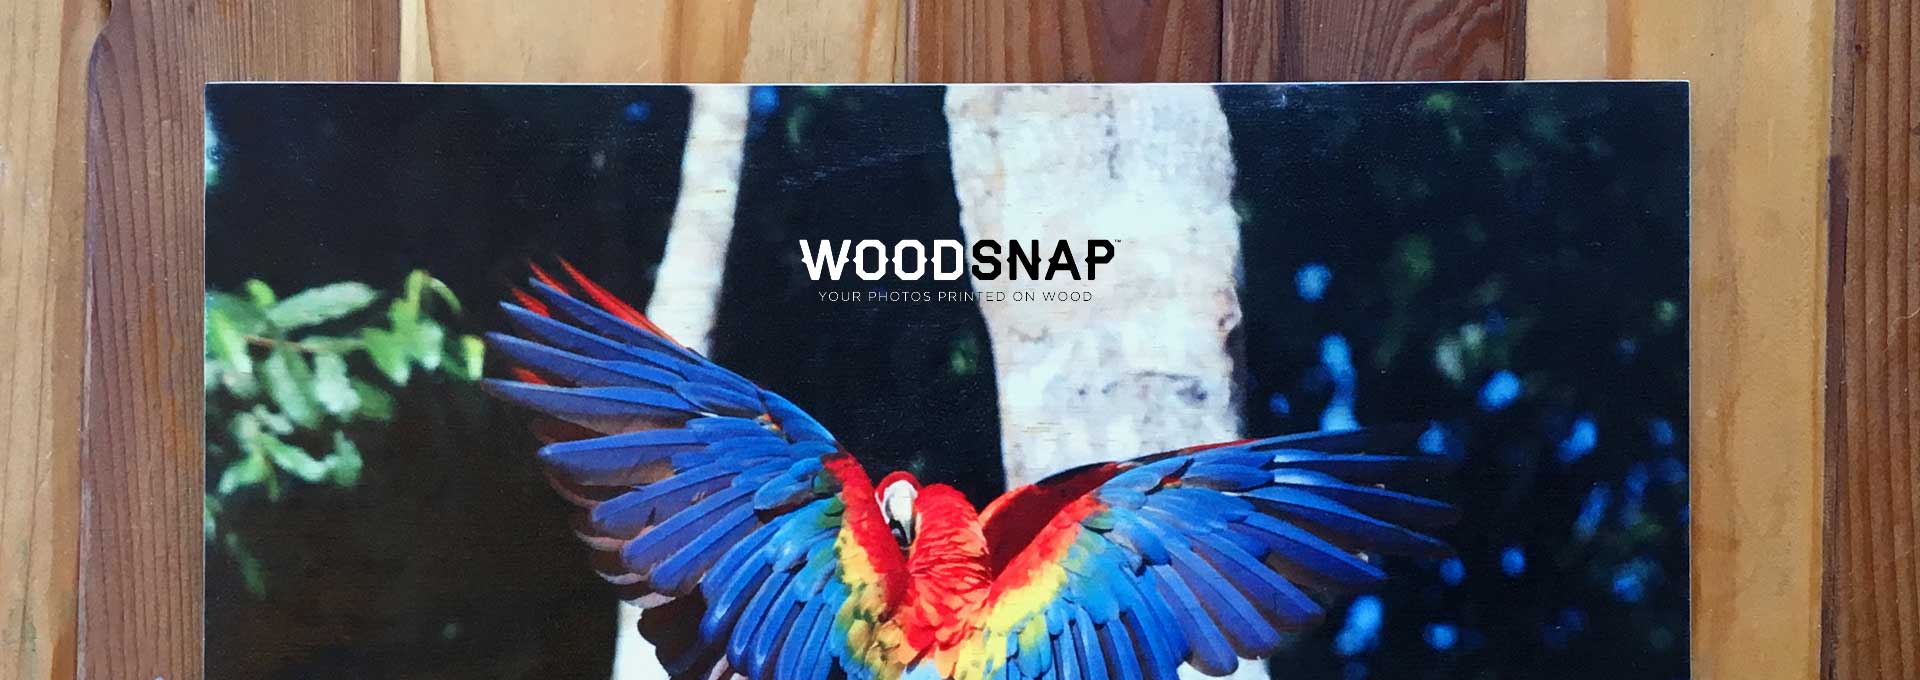 Woodsnap Review. They Print some beautiful wood photo prints